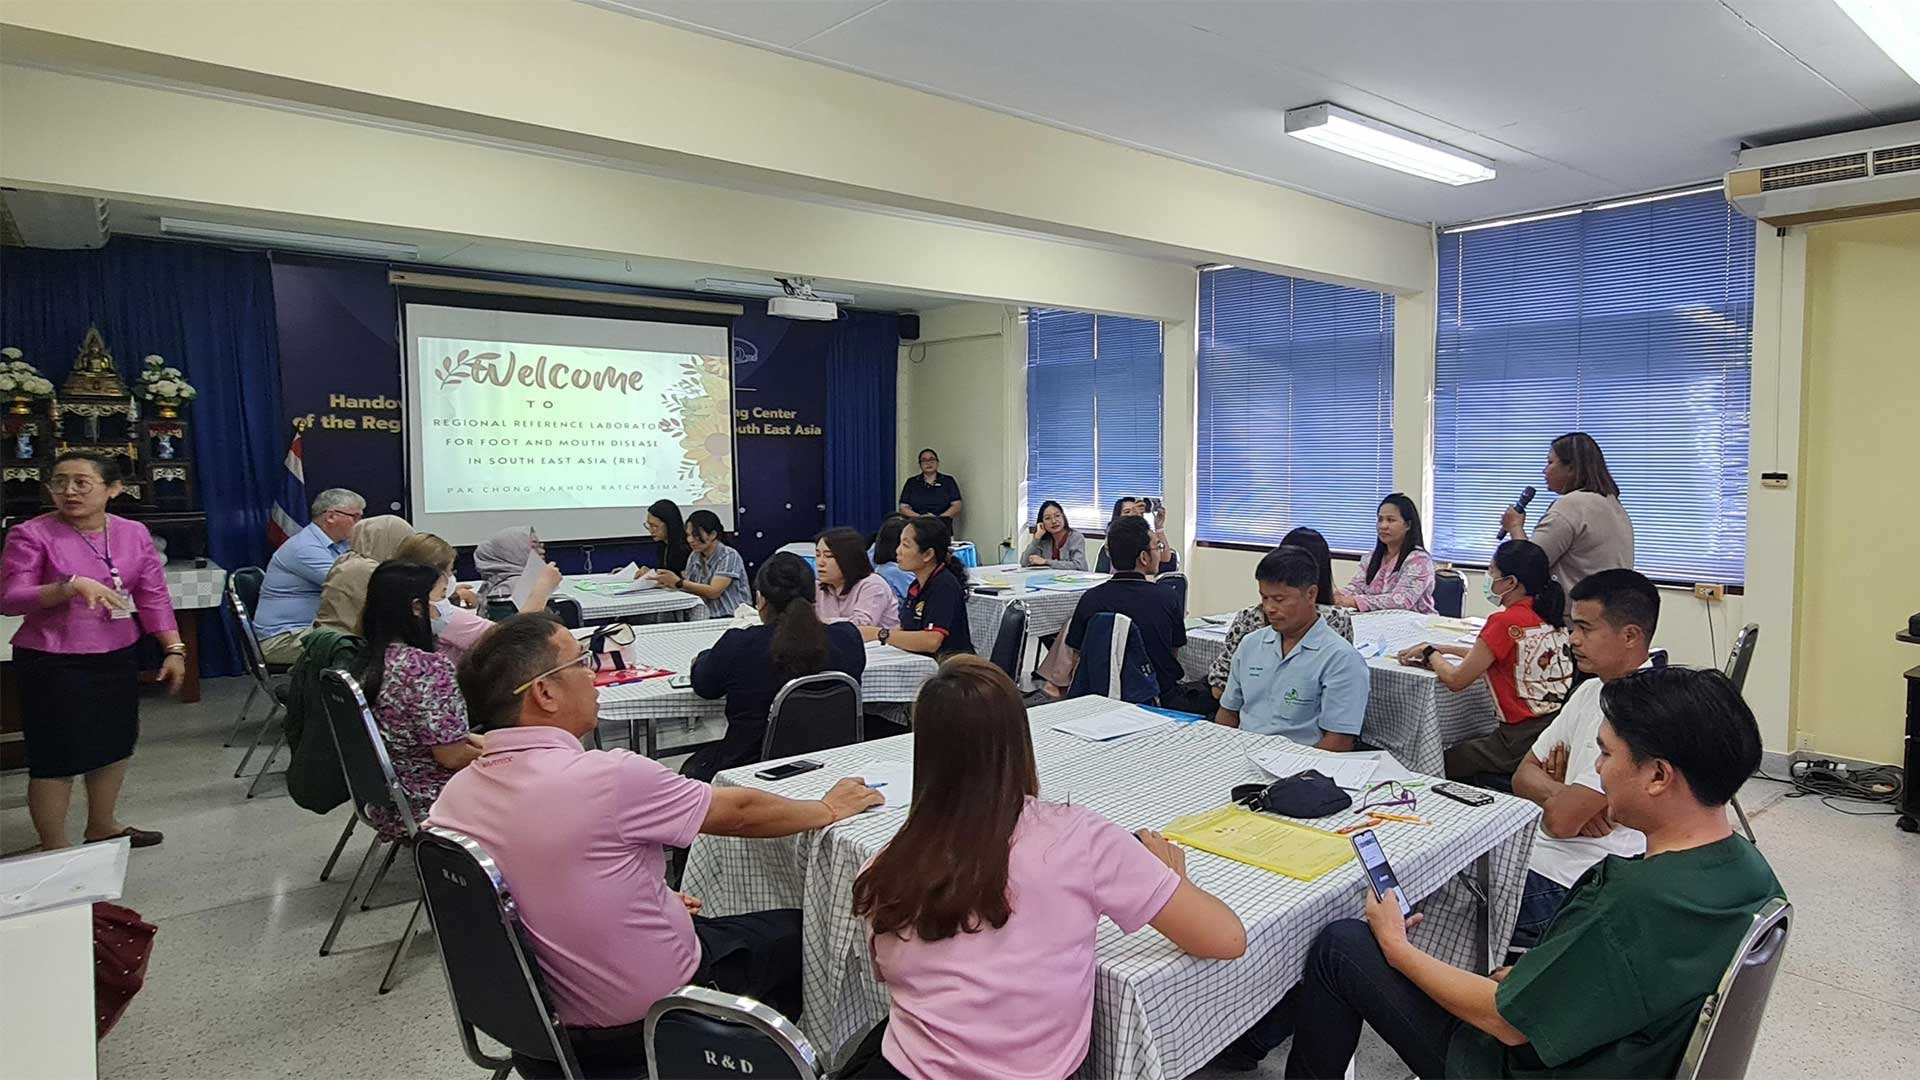 The Defense Threat Reduction Agency’s (DTRA) Cooperative Threat Reduction program recently sponsored a training event in Thailand that focused on updating participants in the latest Competitive- Enzyme Linked Immunosorbent Assay (C-ELISA) techniques.